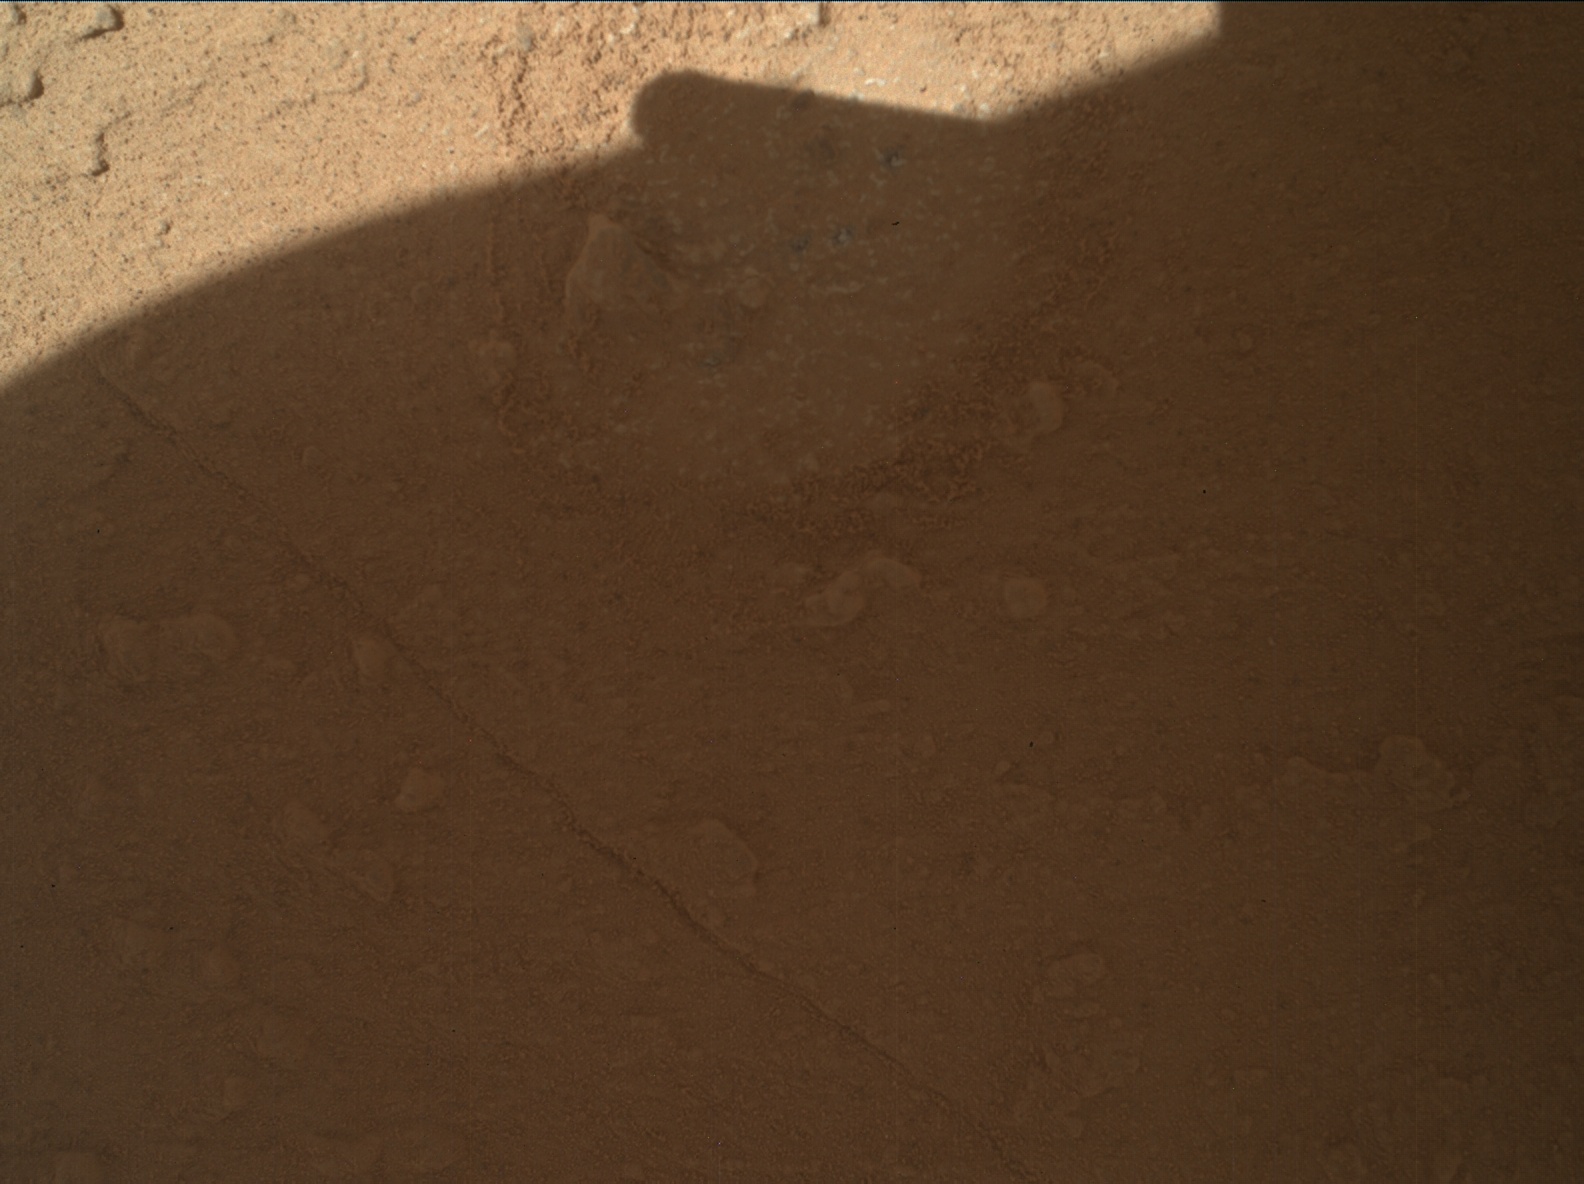 Nasa's Mars rover Curiosity acquired this image using its Mars Hand Lens Imager (MAHLI) on Sol 3817